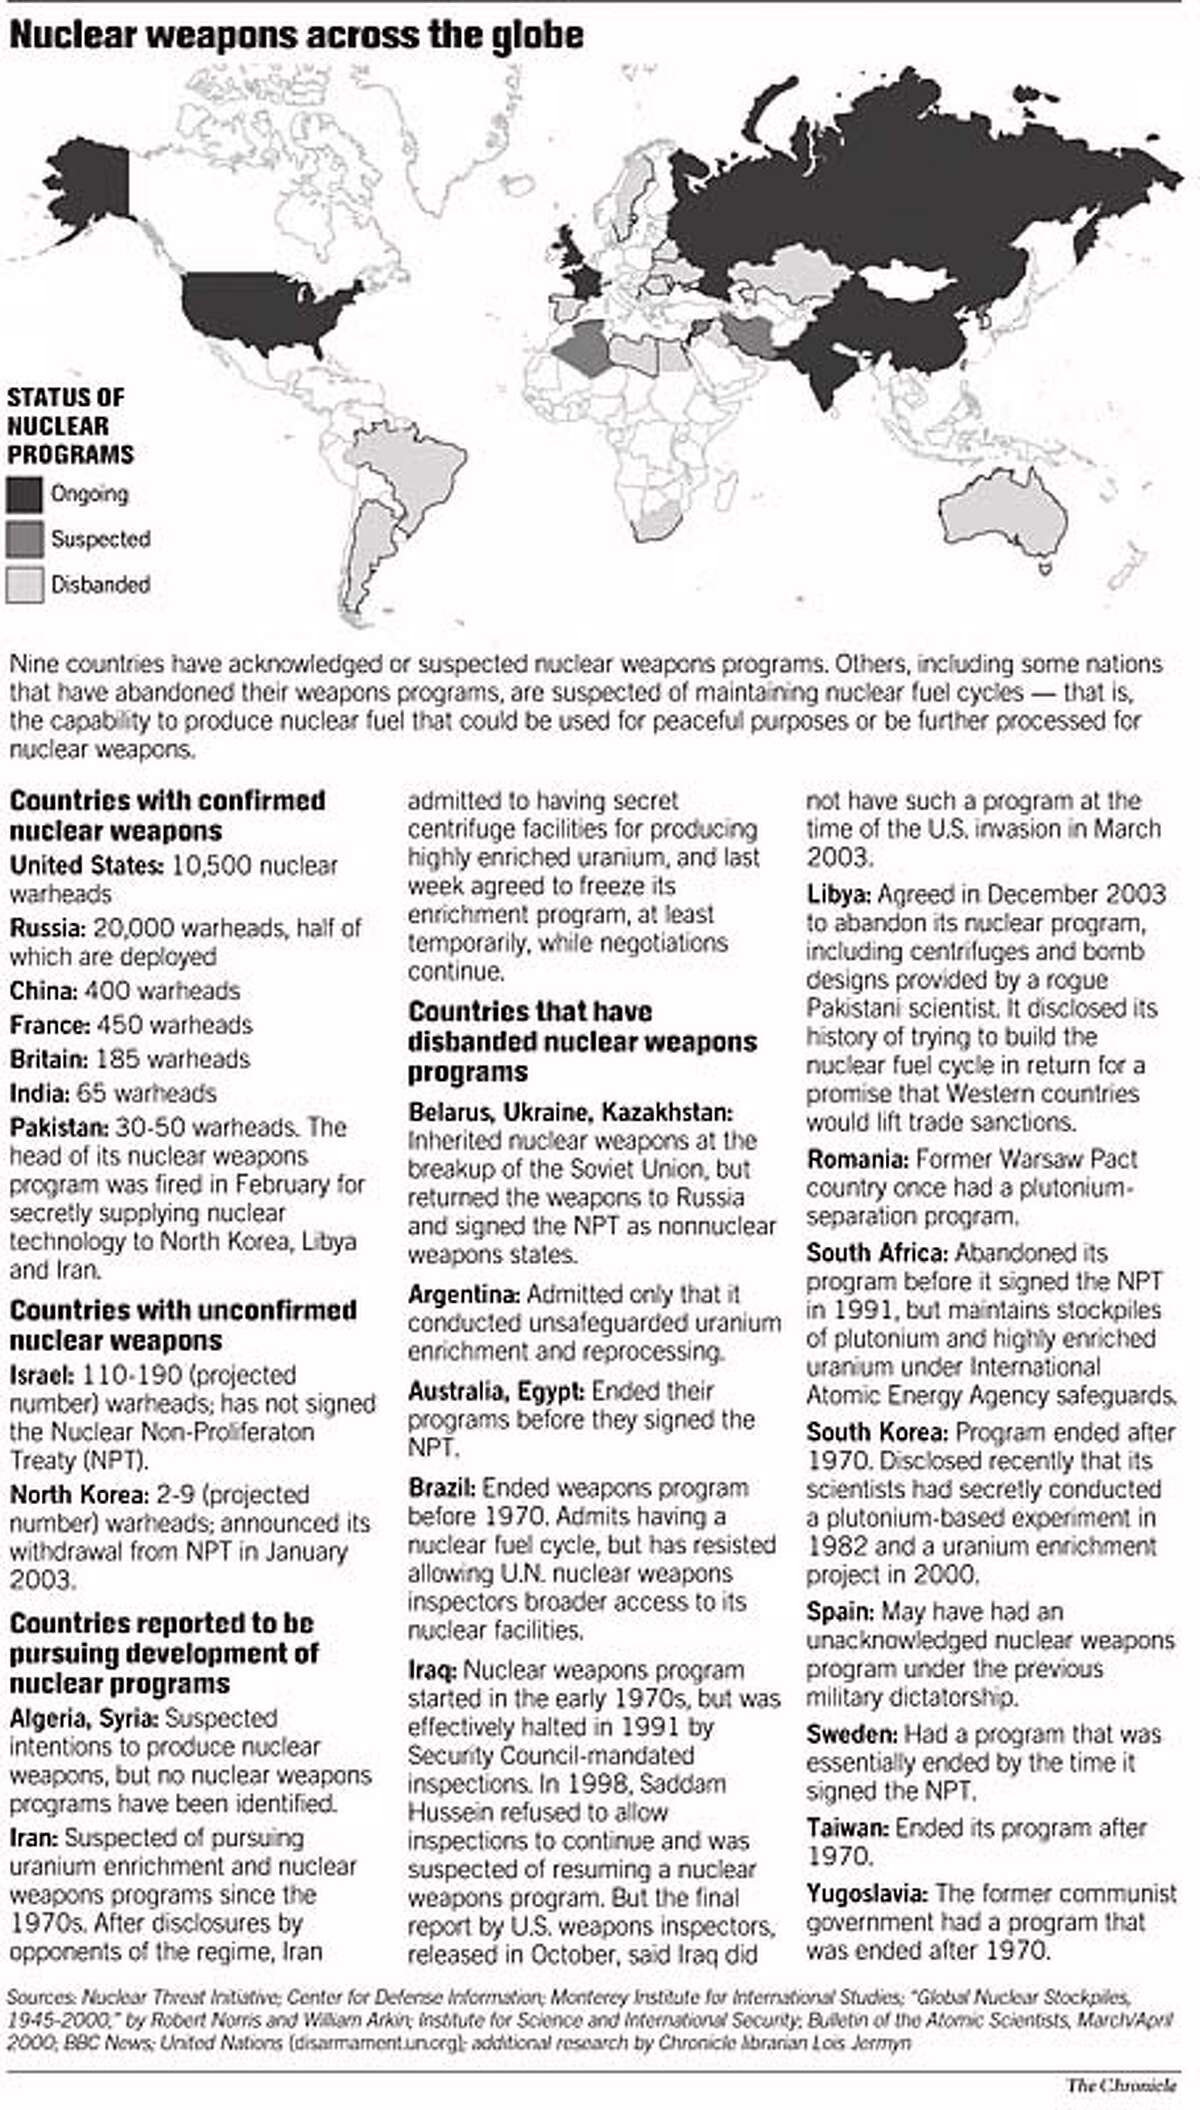 Nuclear Weapons Across the Globe. Chronicle Graphic